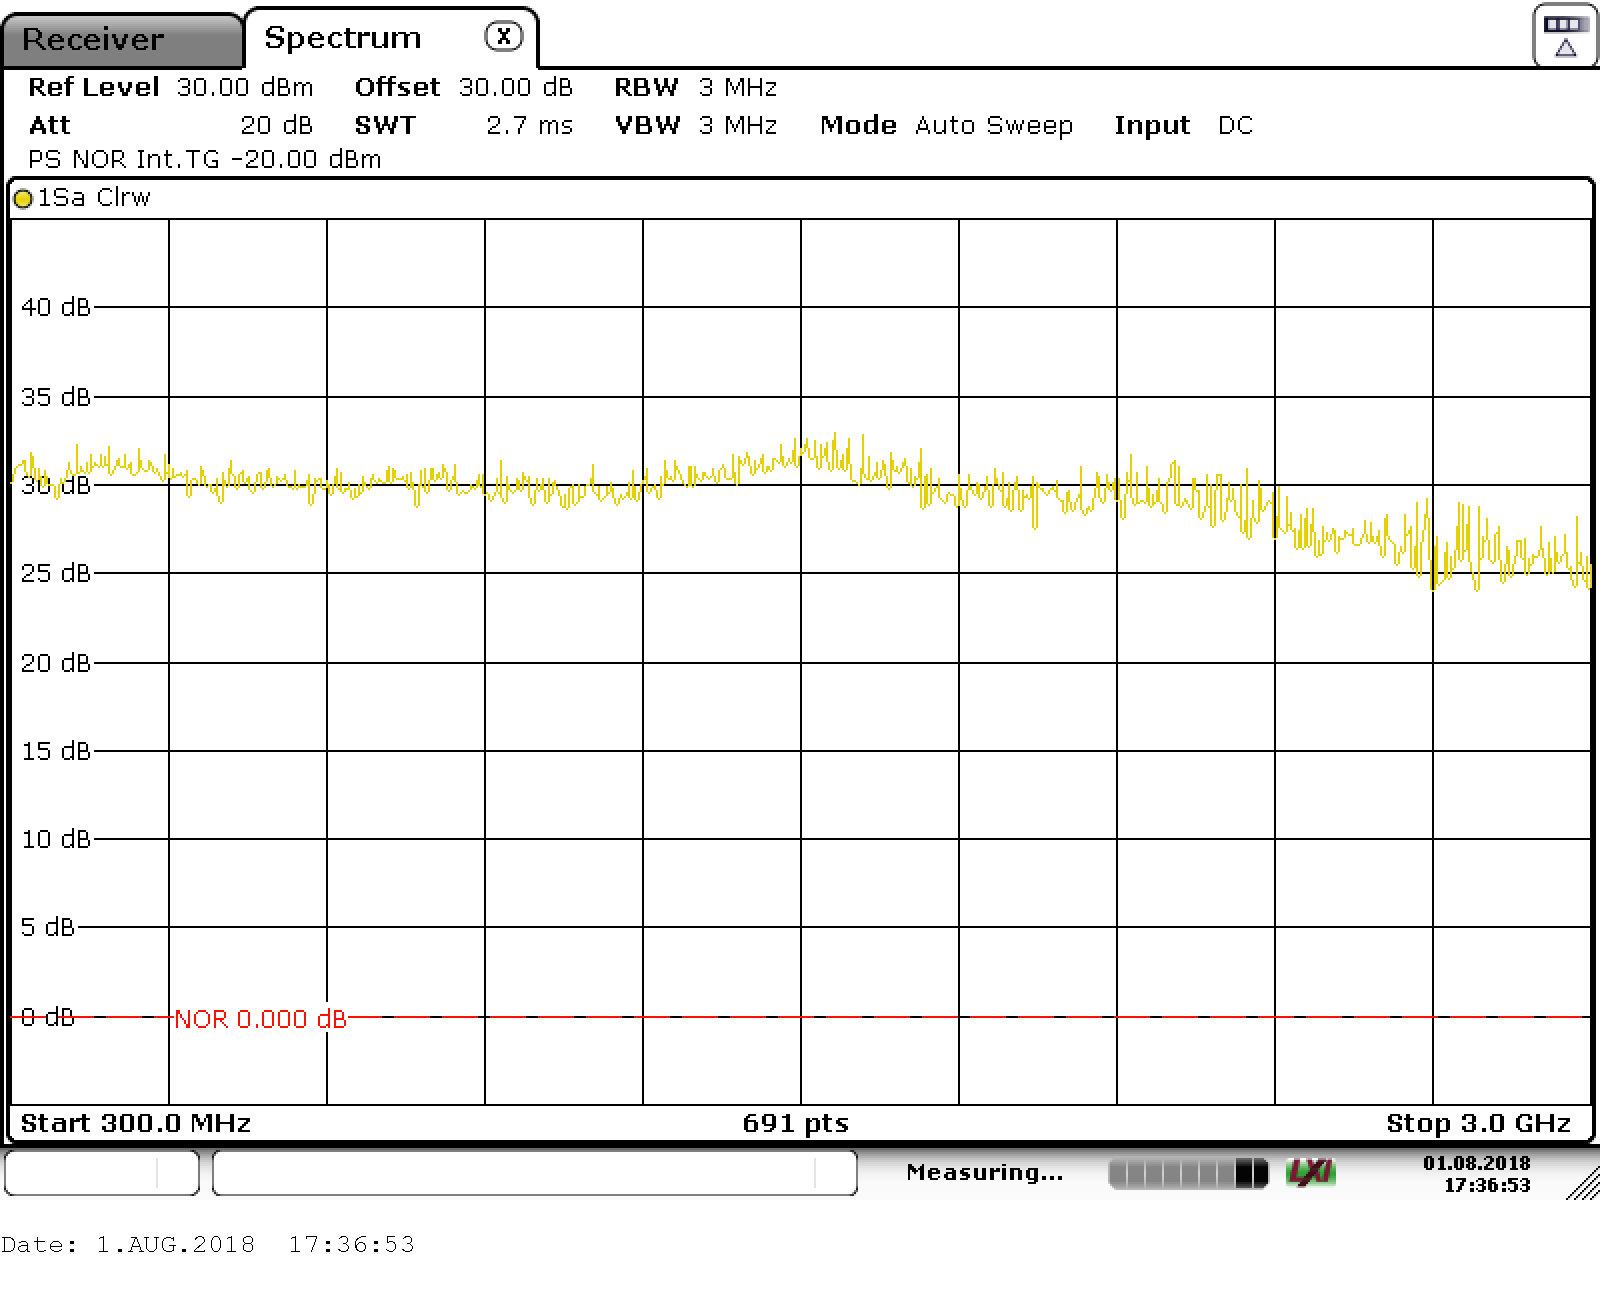 Gain over frequency range 300MHz - 3GHz.